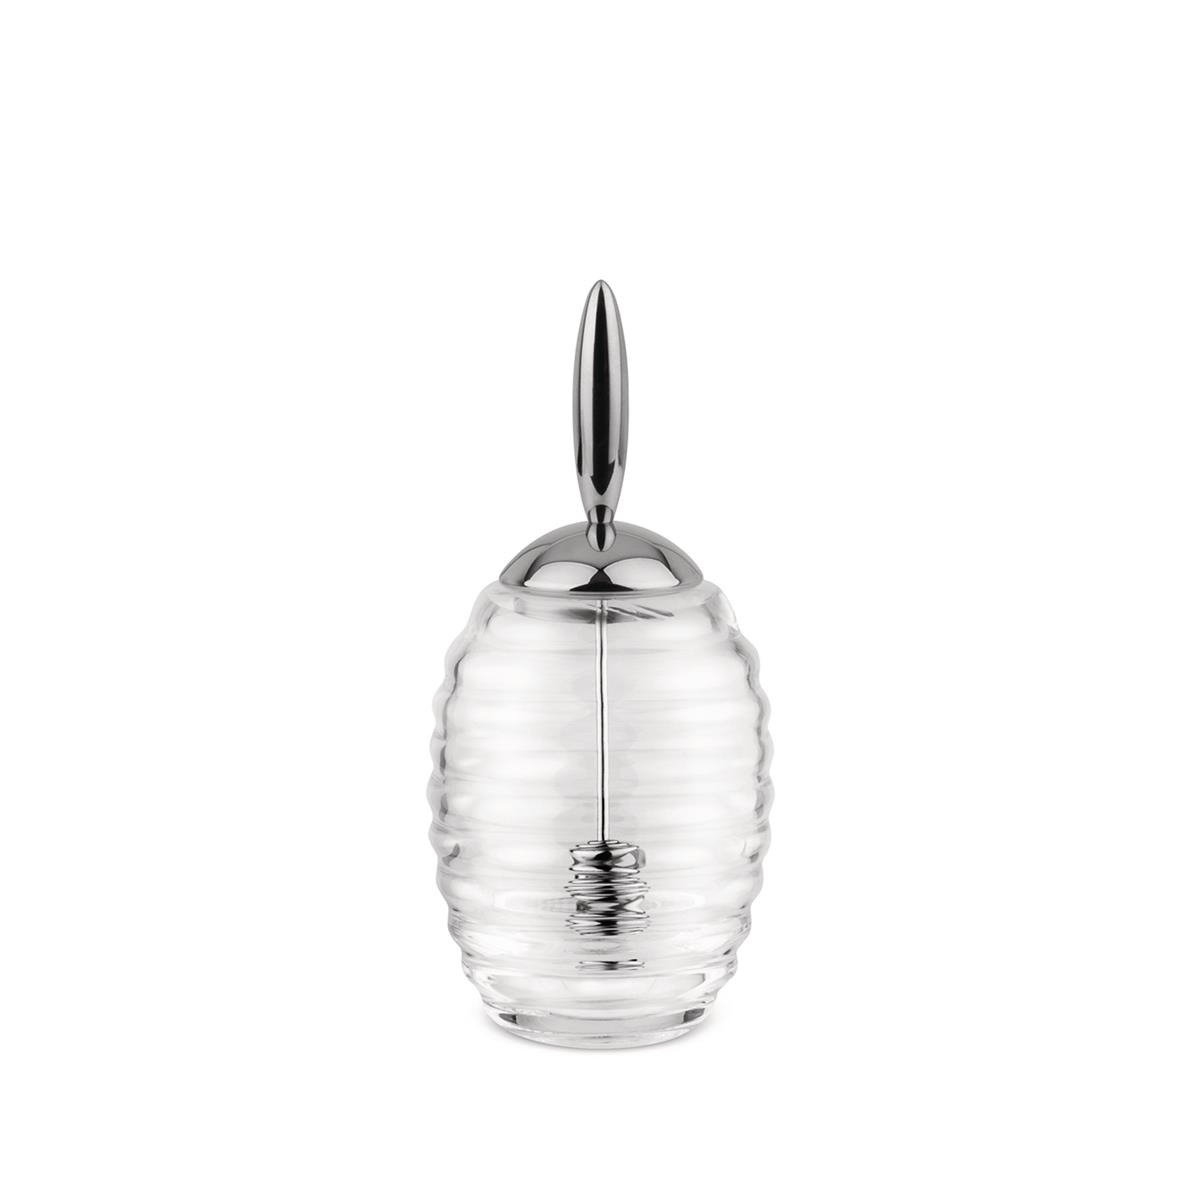 Alessi-Pots & Pans Colander in 18/10 stainless steel mirror polished